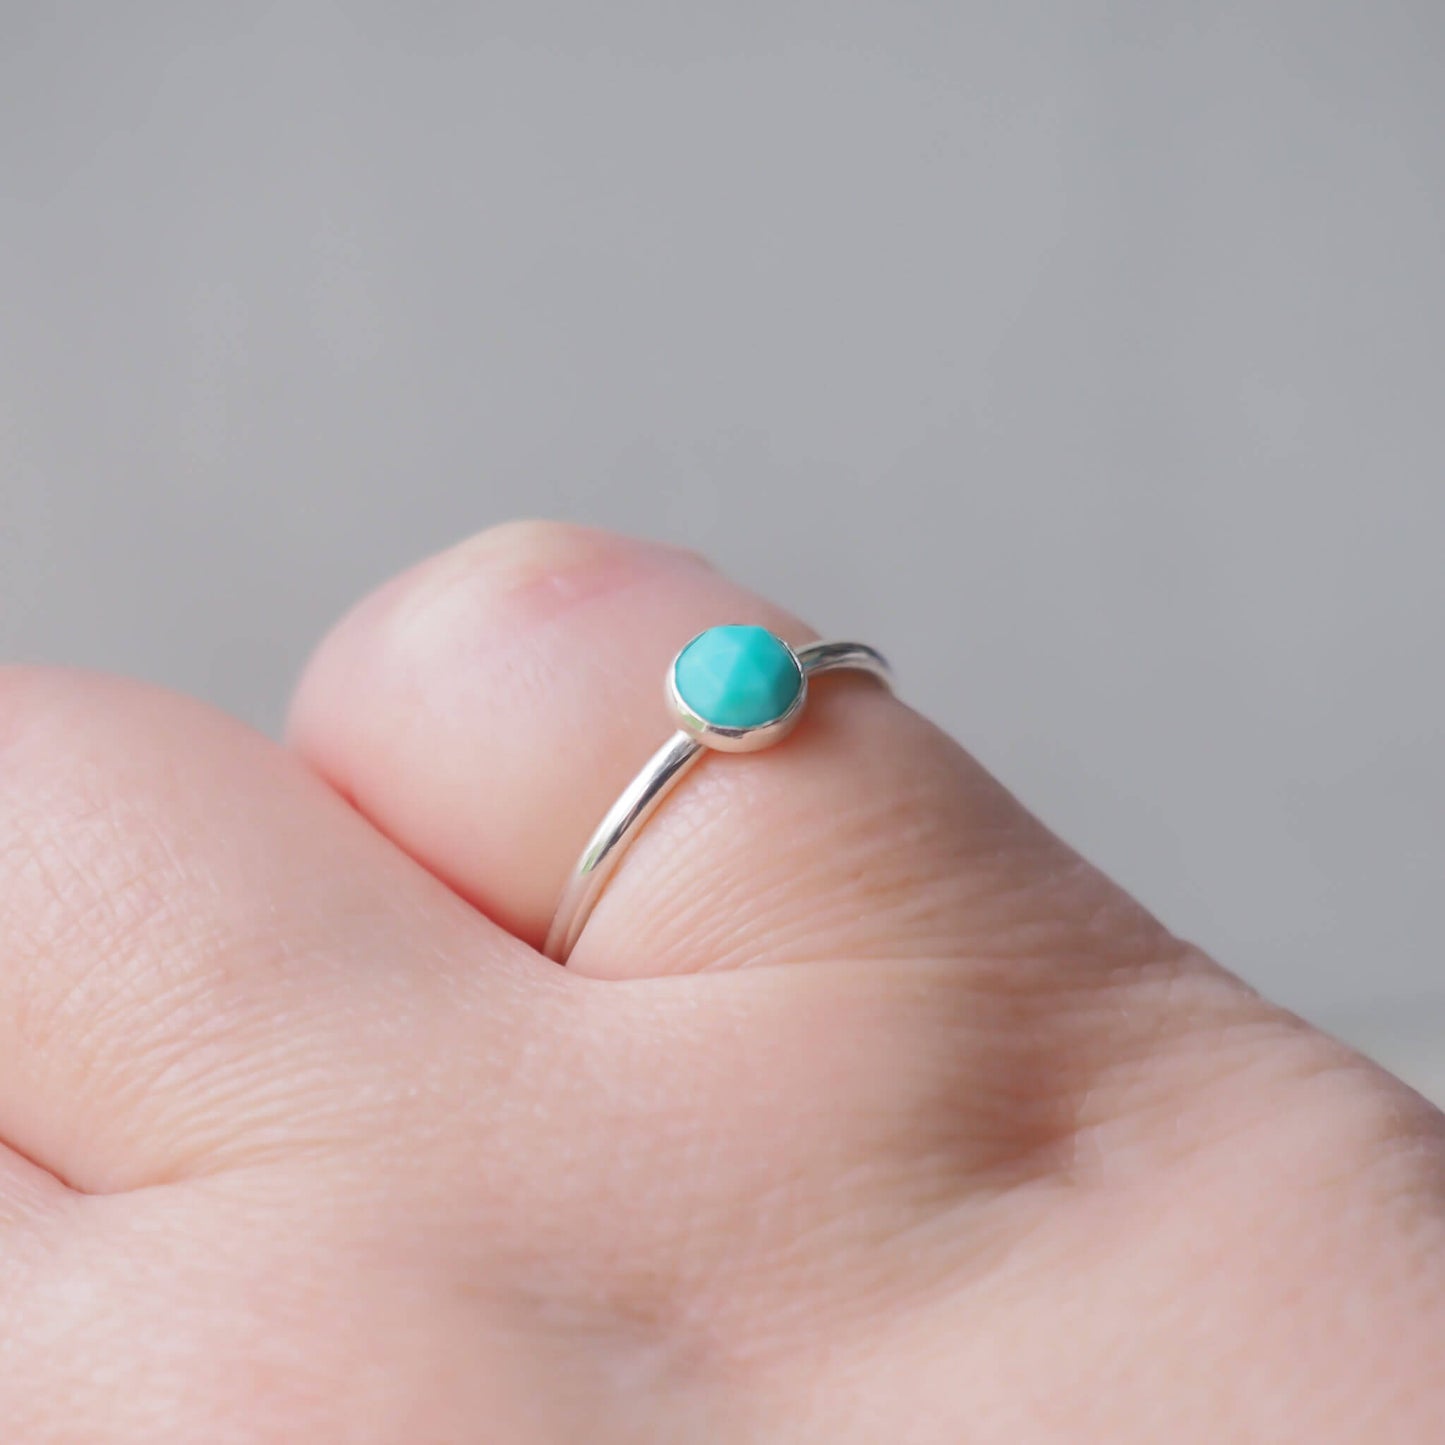 silver and turquoise solitaire ring worn on hand. Handmade in Scotland by maram jewellery